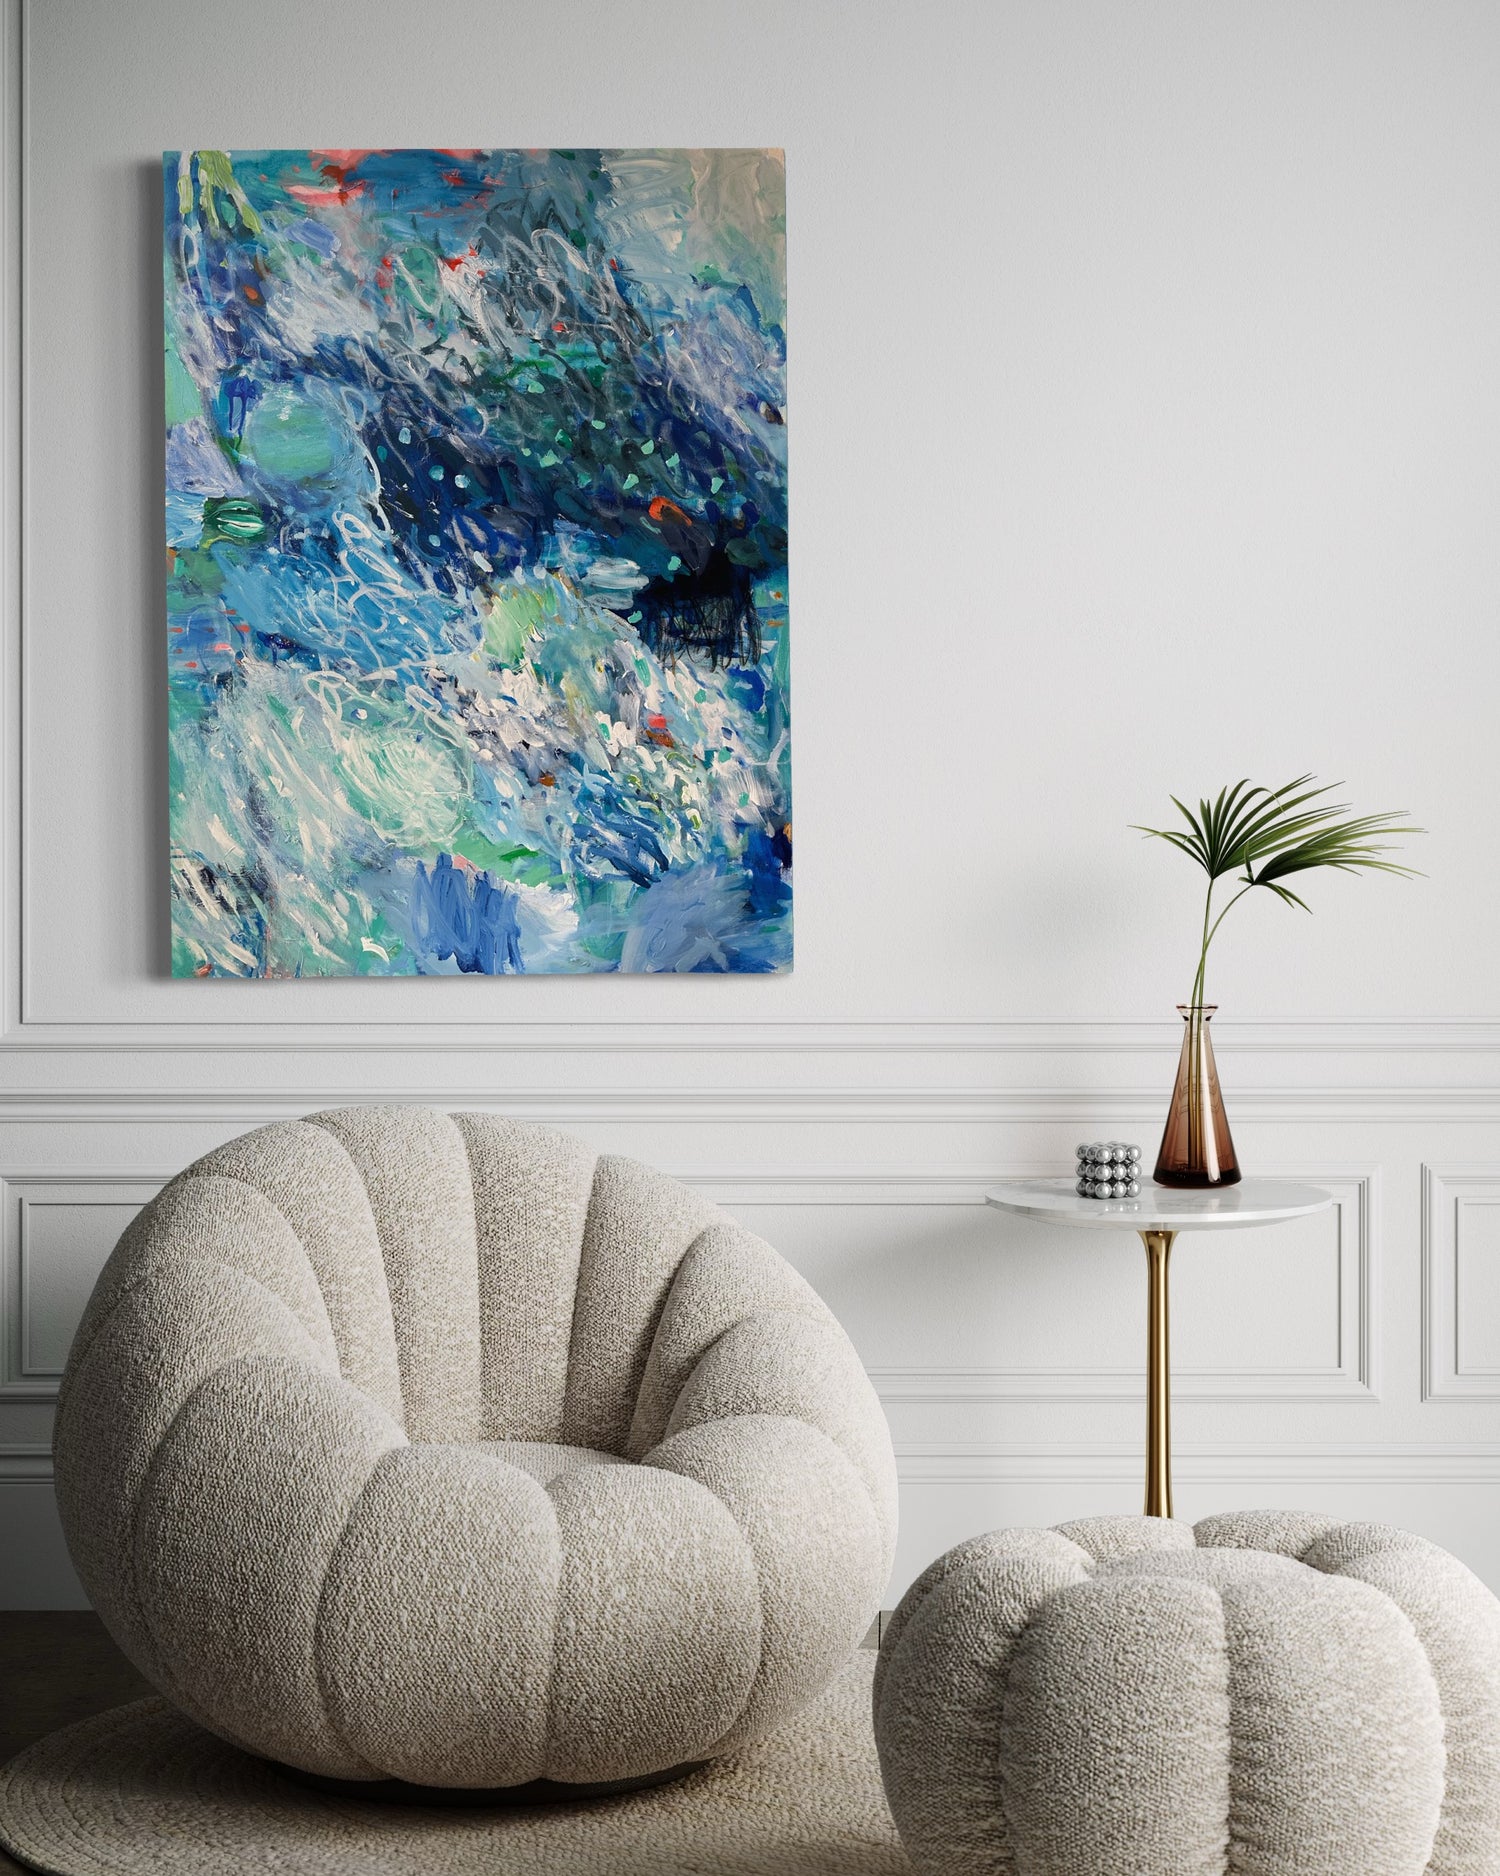 An ocean inspired abstract painting in the colours of blue, green and sparks of orange. Home decor. Interior design. Decorative art. Blue art. Affordable art. Dinning room with artwork.